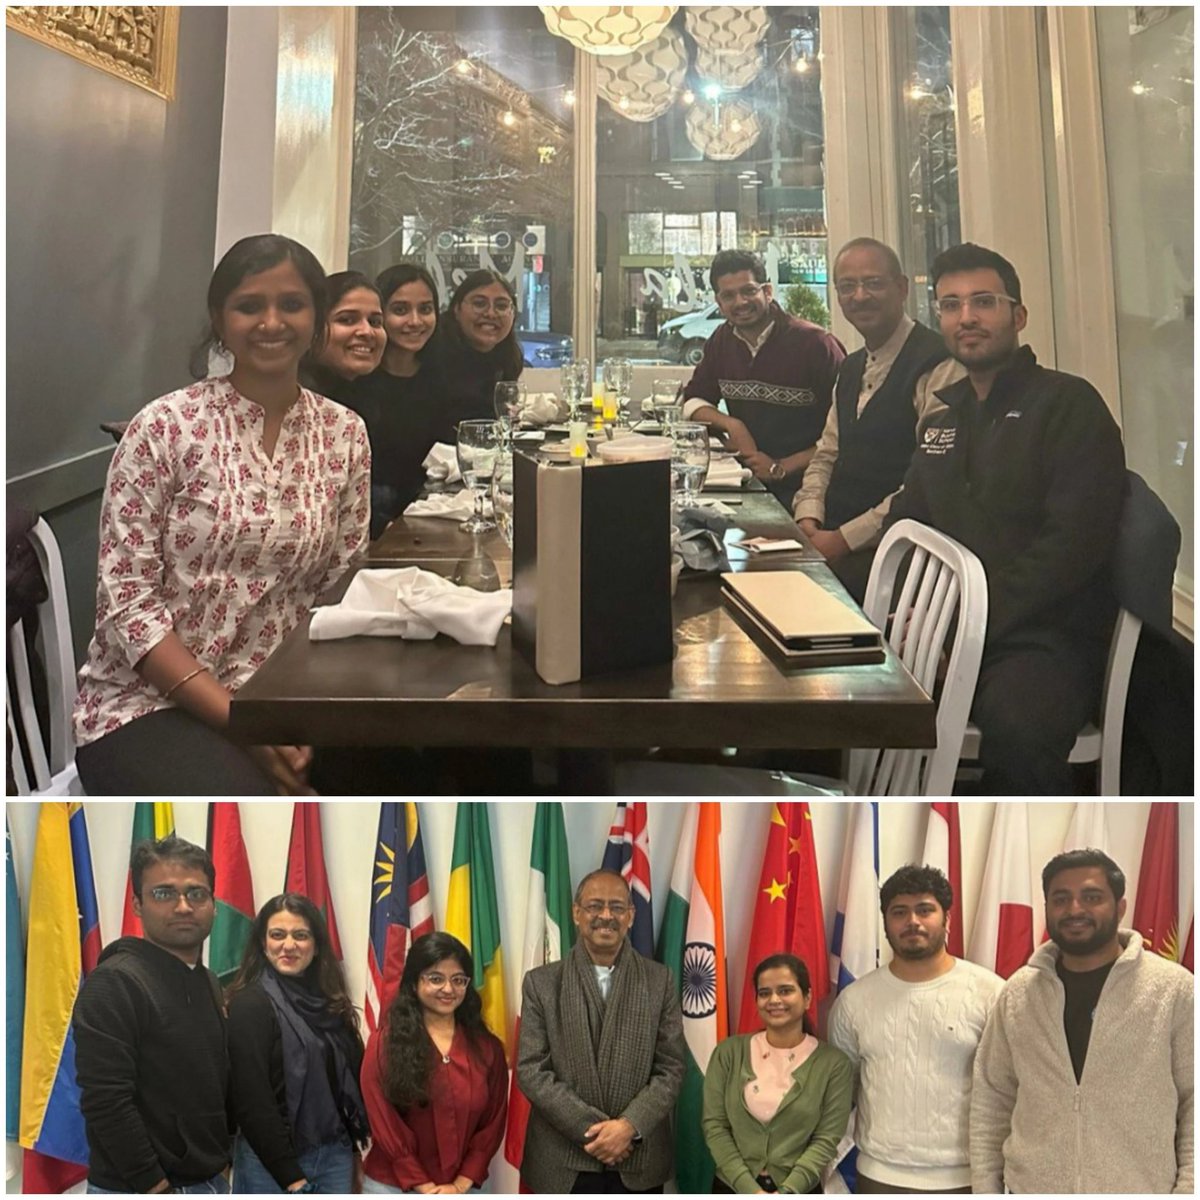 Still in the USA spreading the message of Nexus of Good apart from other extremely useful set of discussions surrounding events in India. This discussion was with Indian students at Harvard and Tuft Universities. Heartening to note the excitement about Nexus of Good.